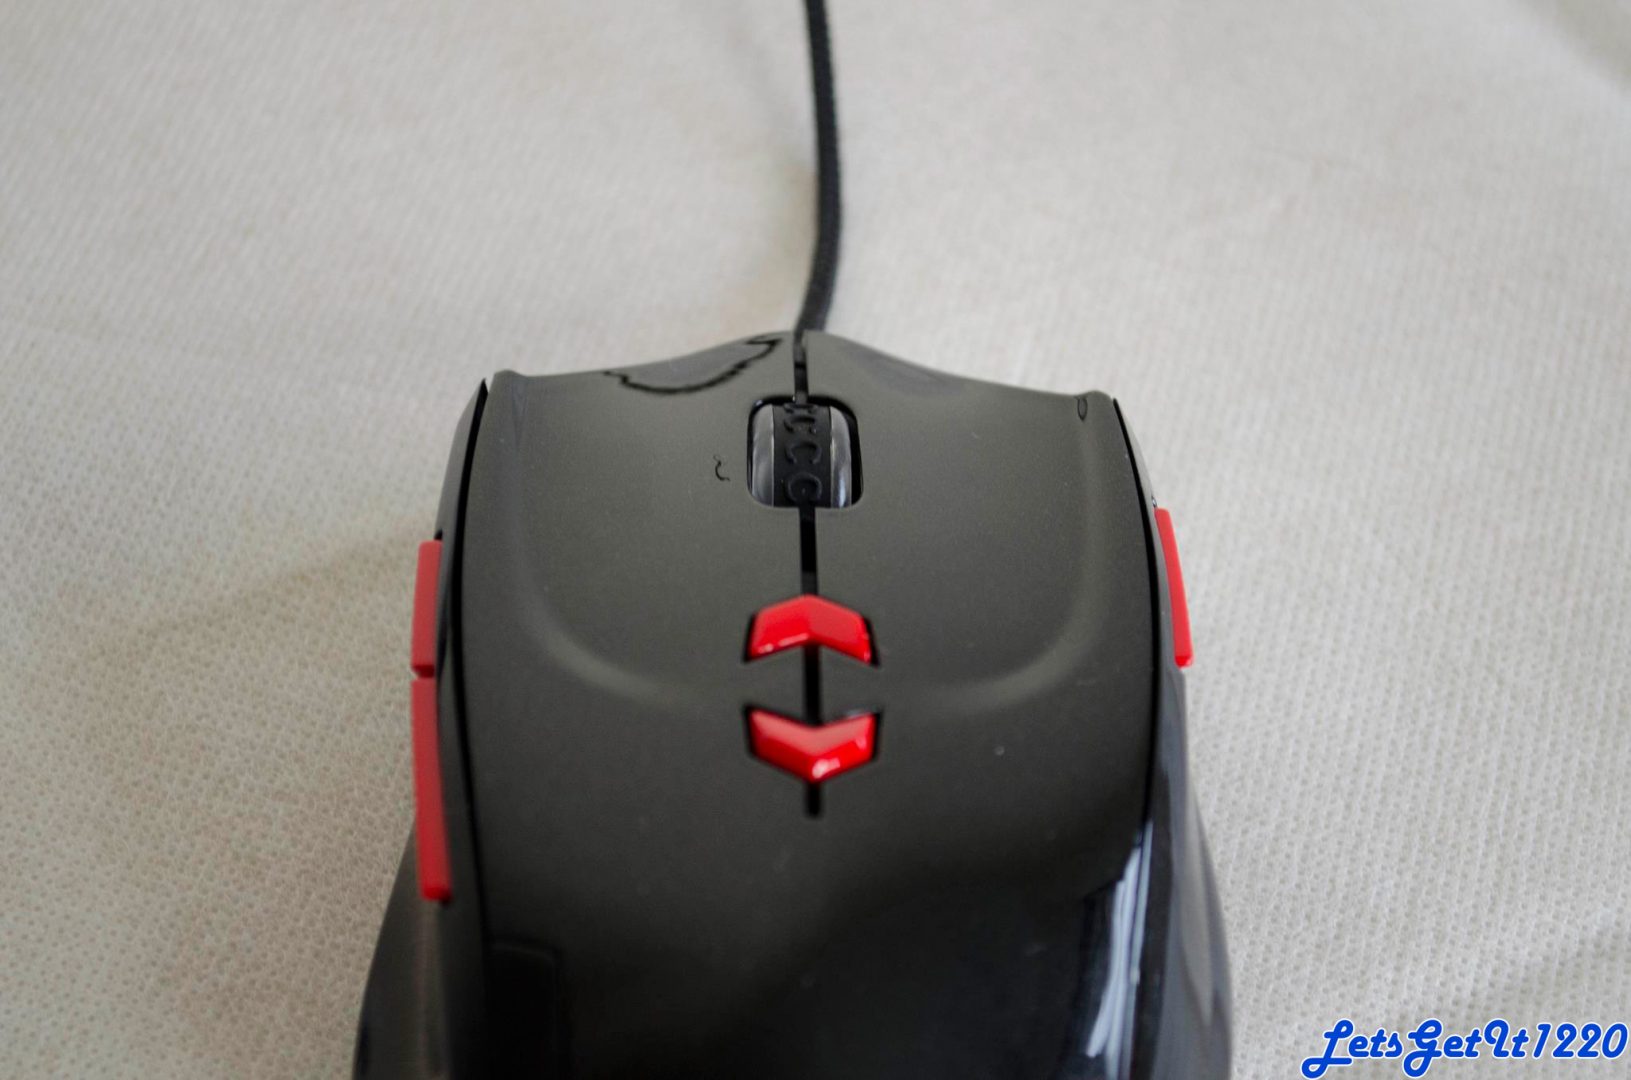 Tt eSPORTS Theron Plus Mouse buttons